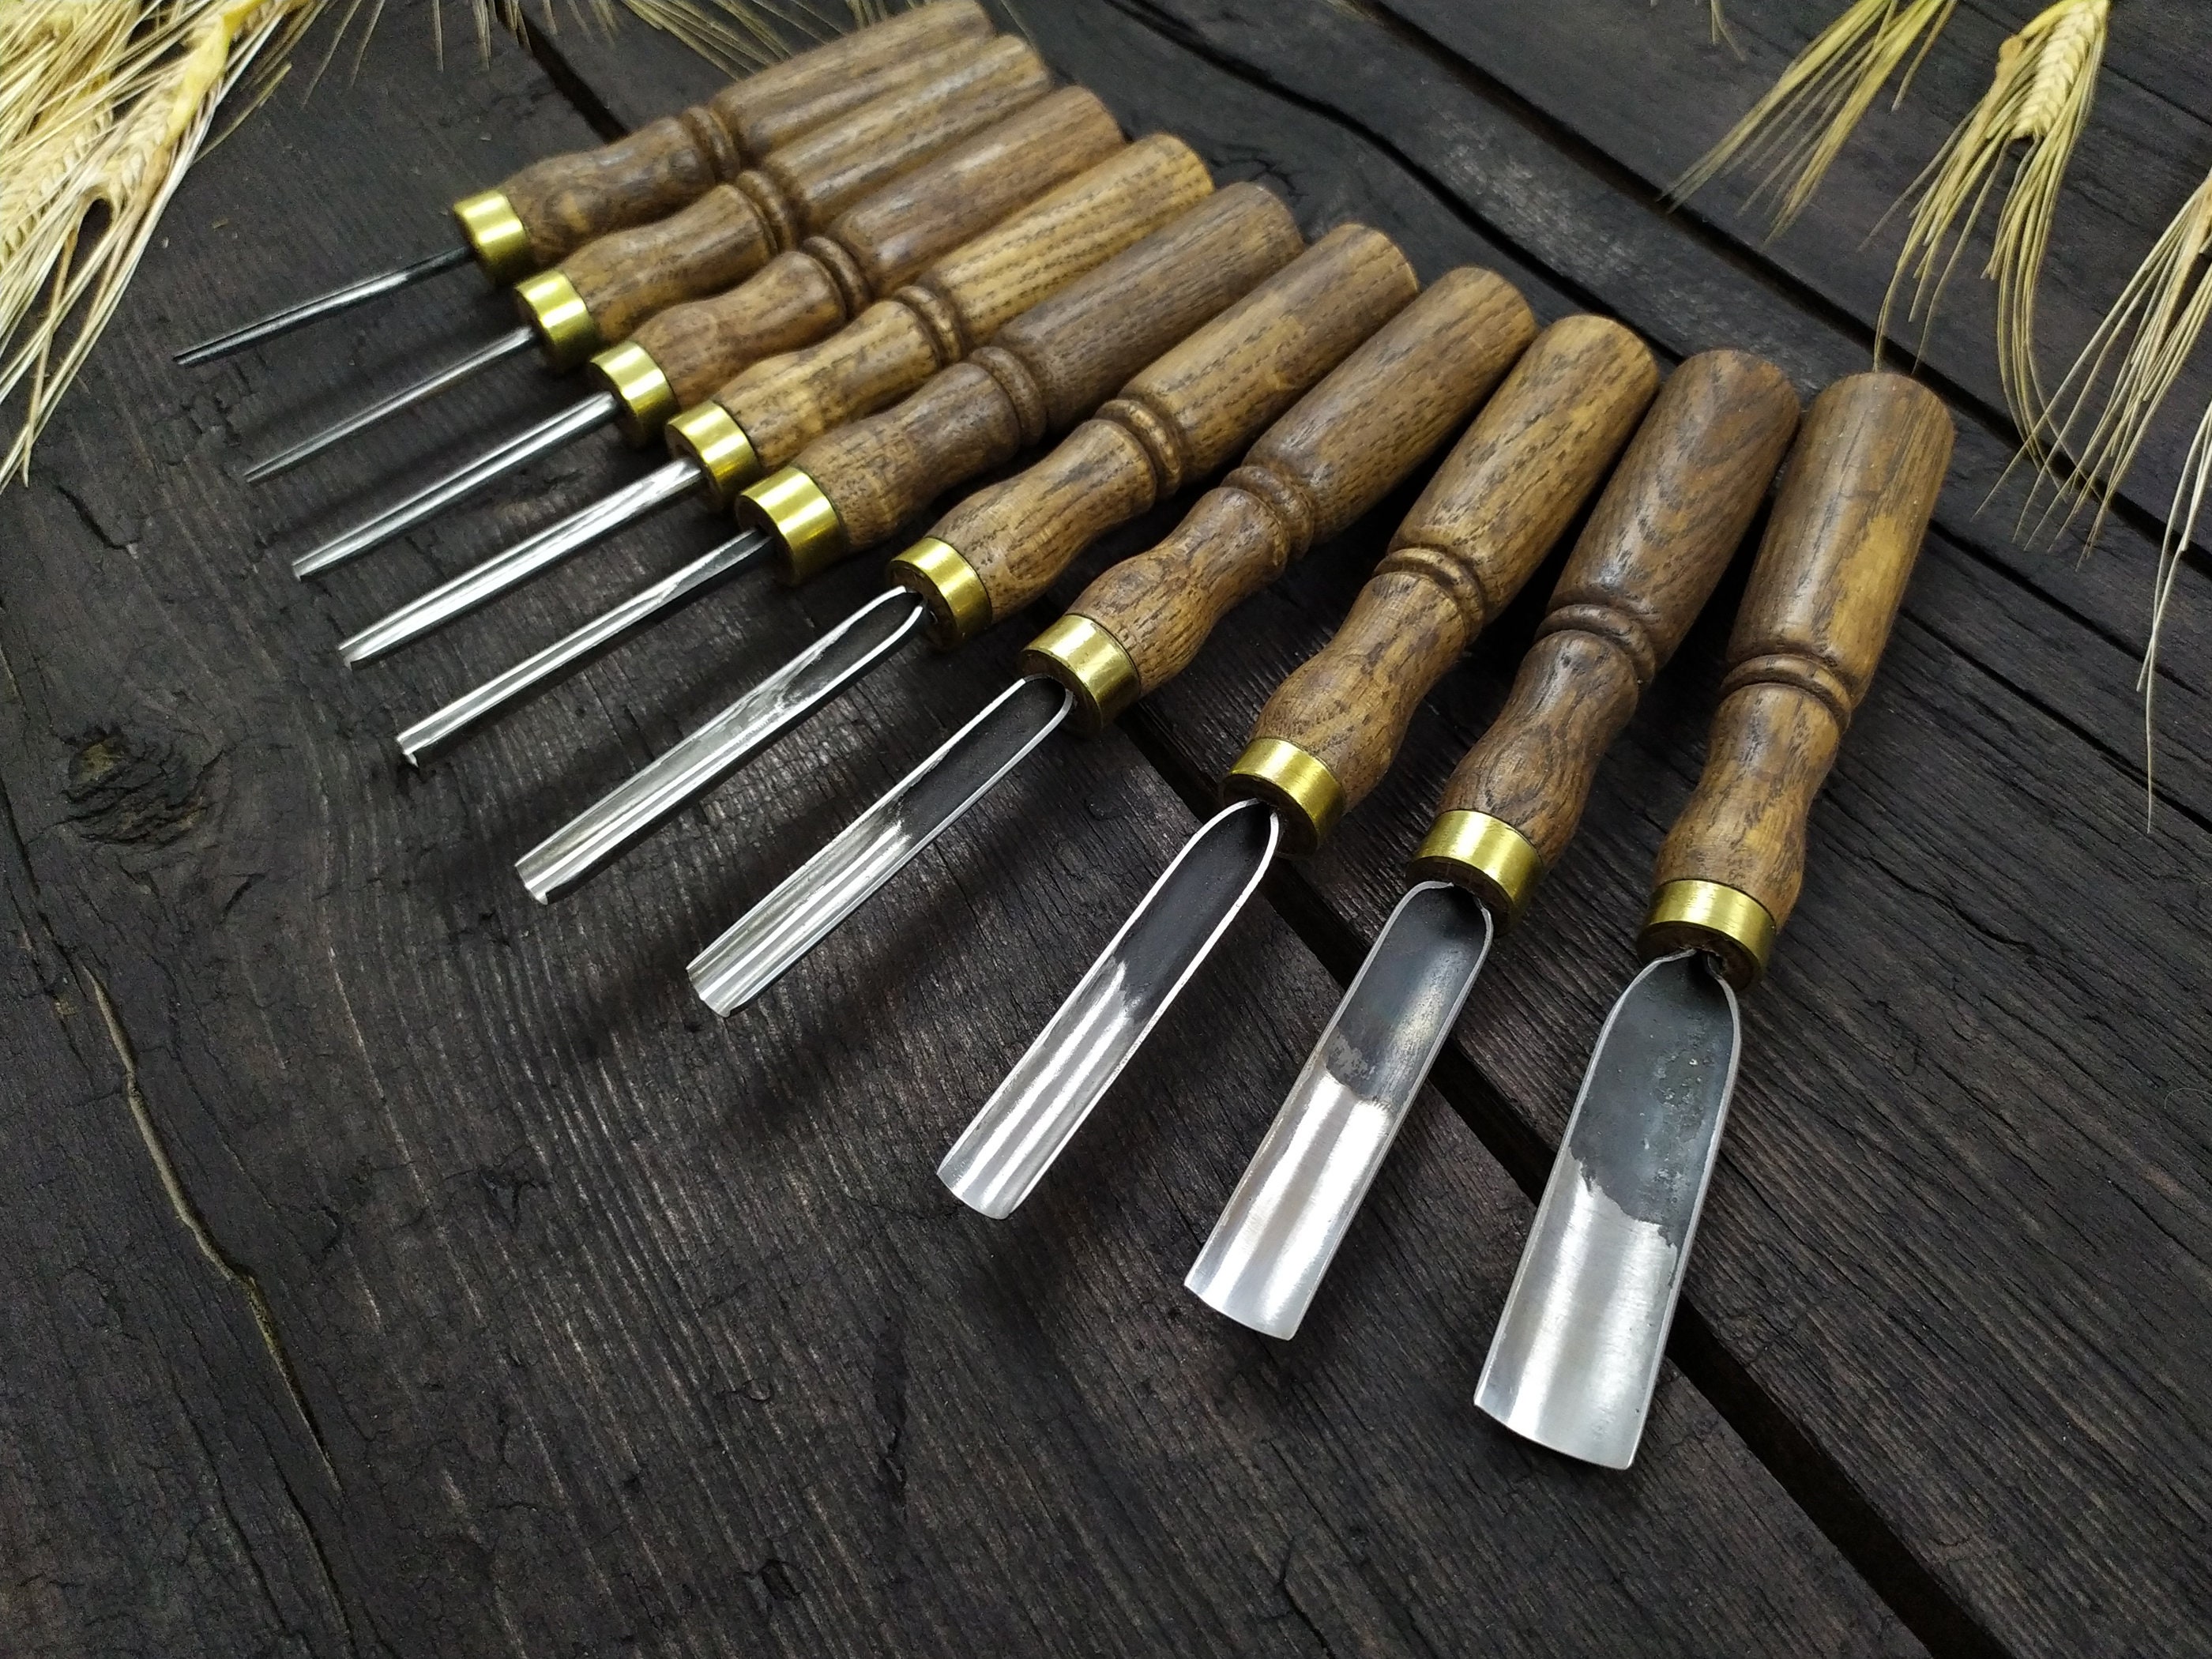 Set of 12 Gouges, Straight and Bent Gouges in Case, Wood Carving Tools,  Forged Steel Tools, Gift for Dad, Gift for Carver, Carpentry Tools -   Israel